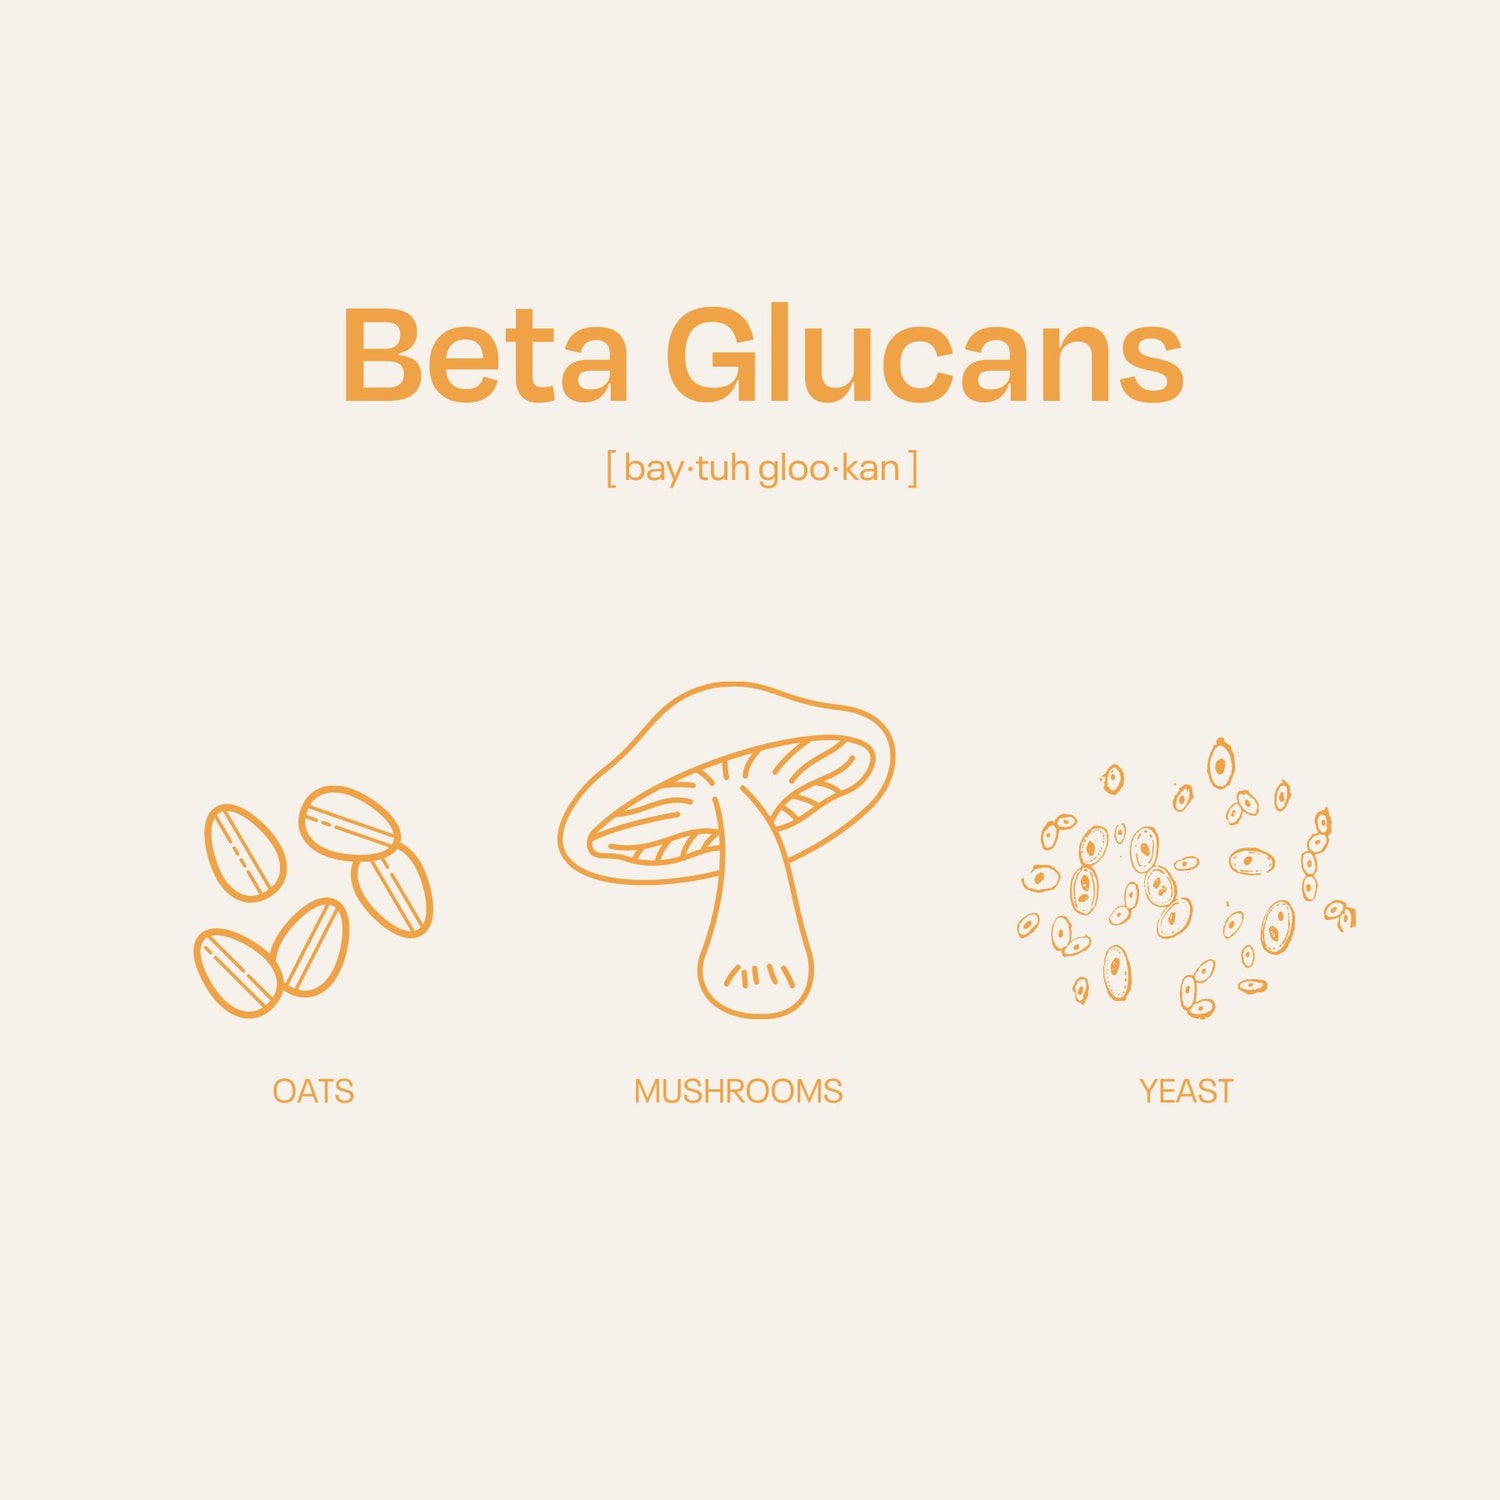 What Are Beta Glucans? The Benefits to Health - Nummies